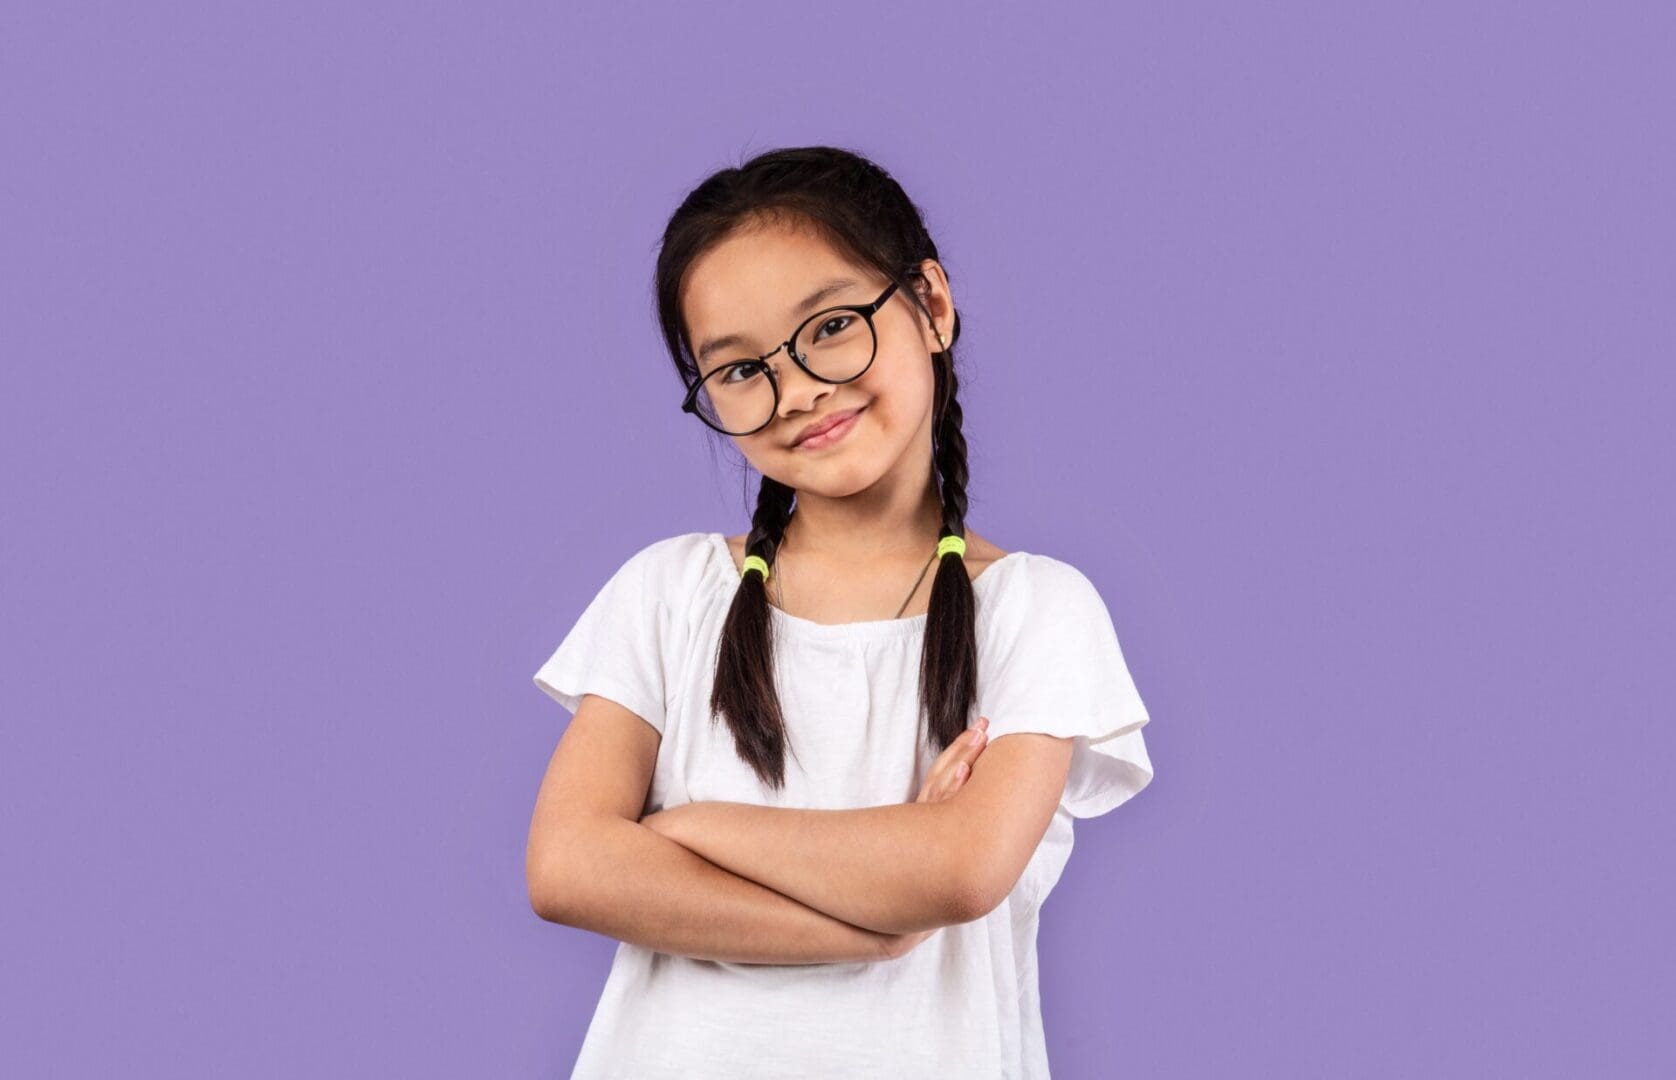 A girl with glasses and pigtails posing for the camera.